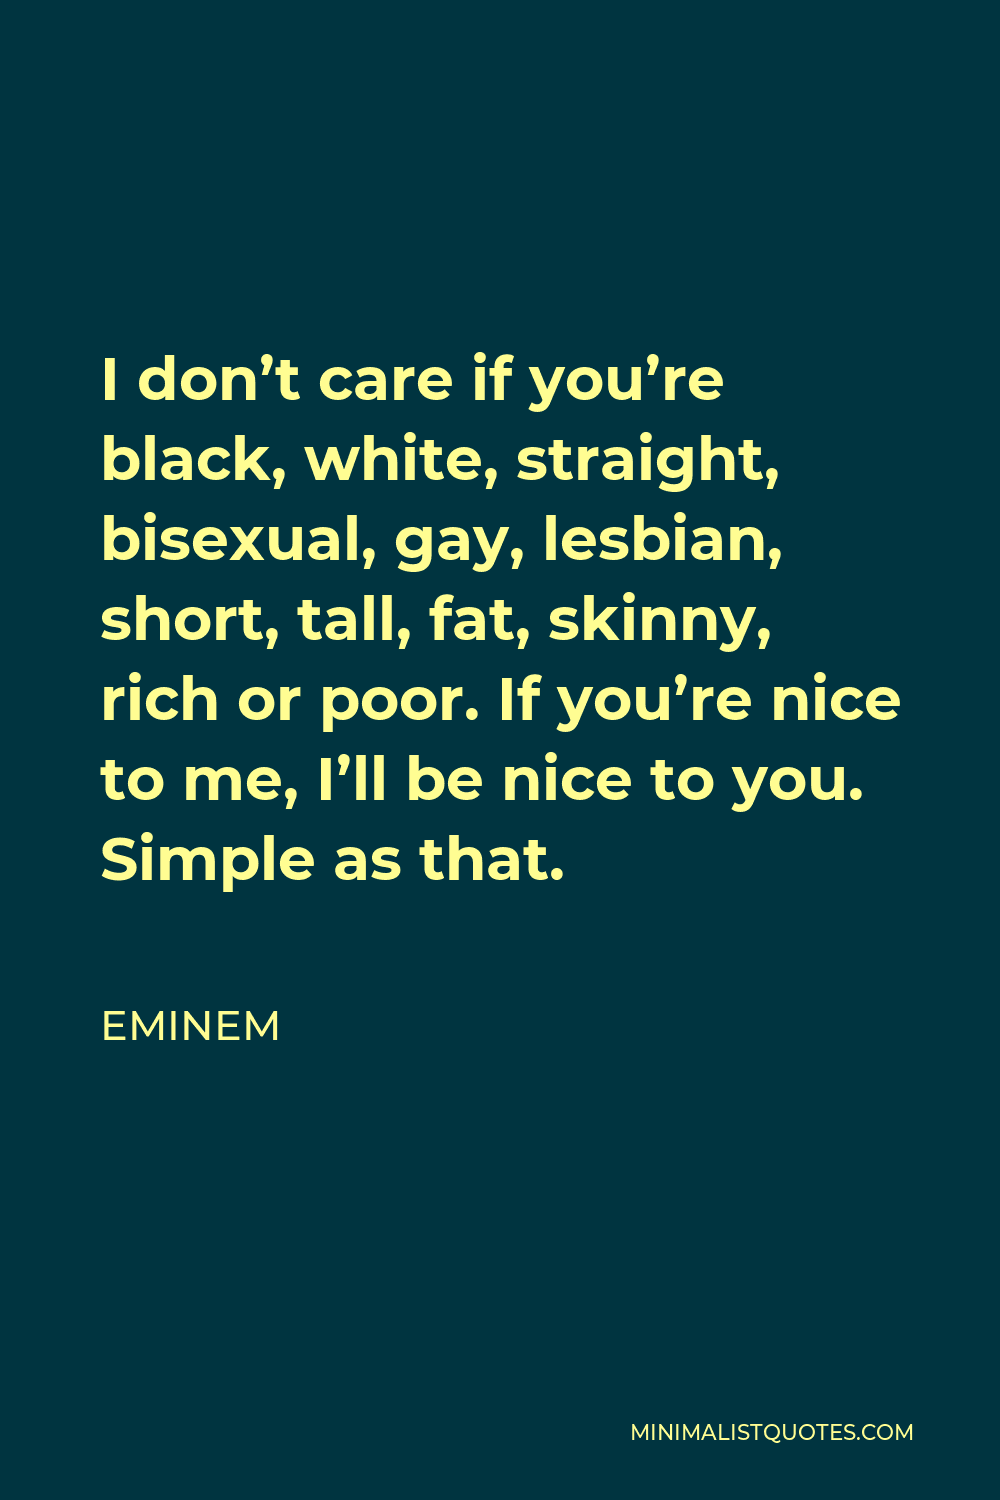 Eminem Quote - I don’t care if you’re black, white, straight, bisexual, gay, lesbian, short, tall, fat, skinny, rich or poor. If you’re nice to me, I’ll be nice to you. Simple as that.